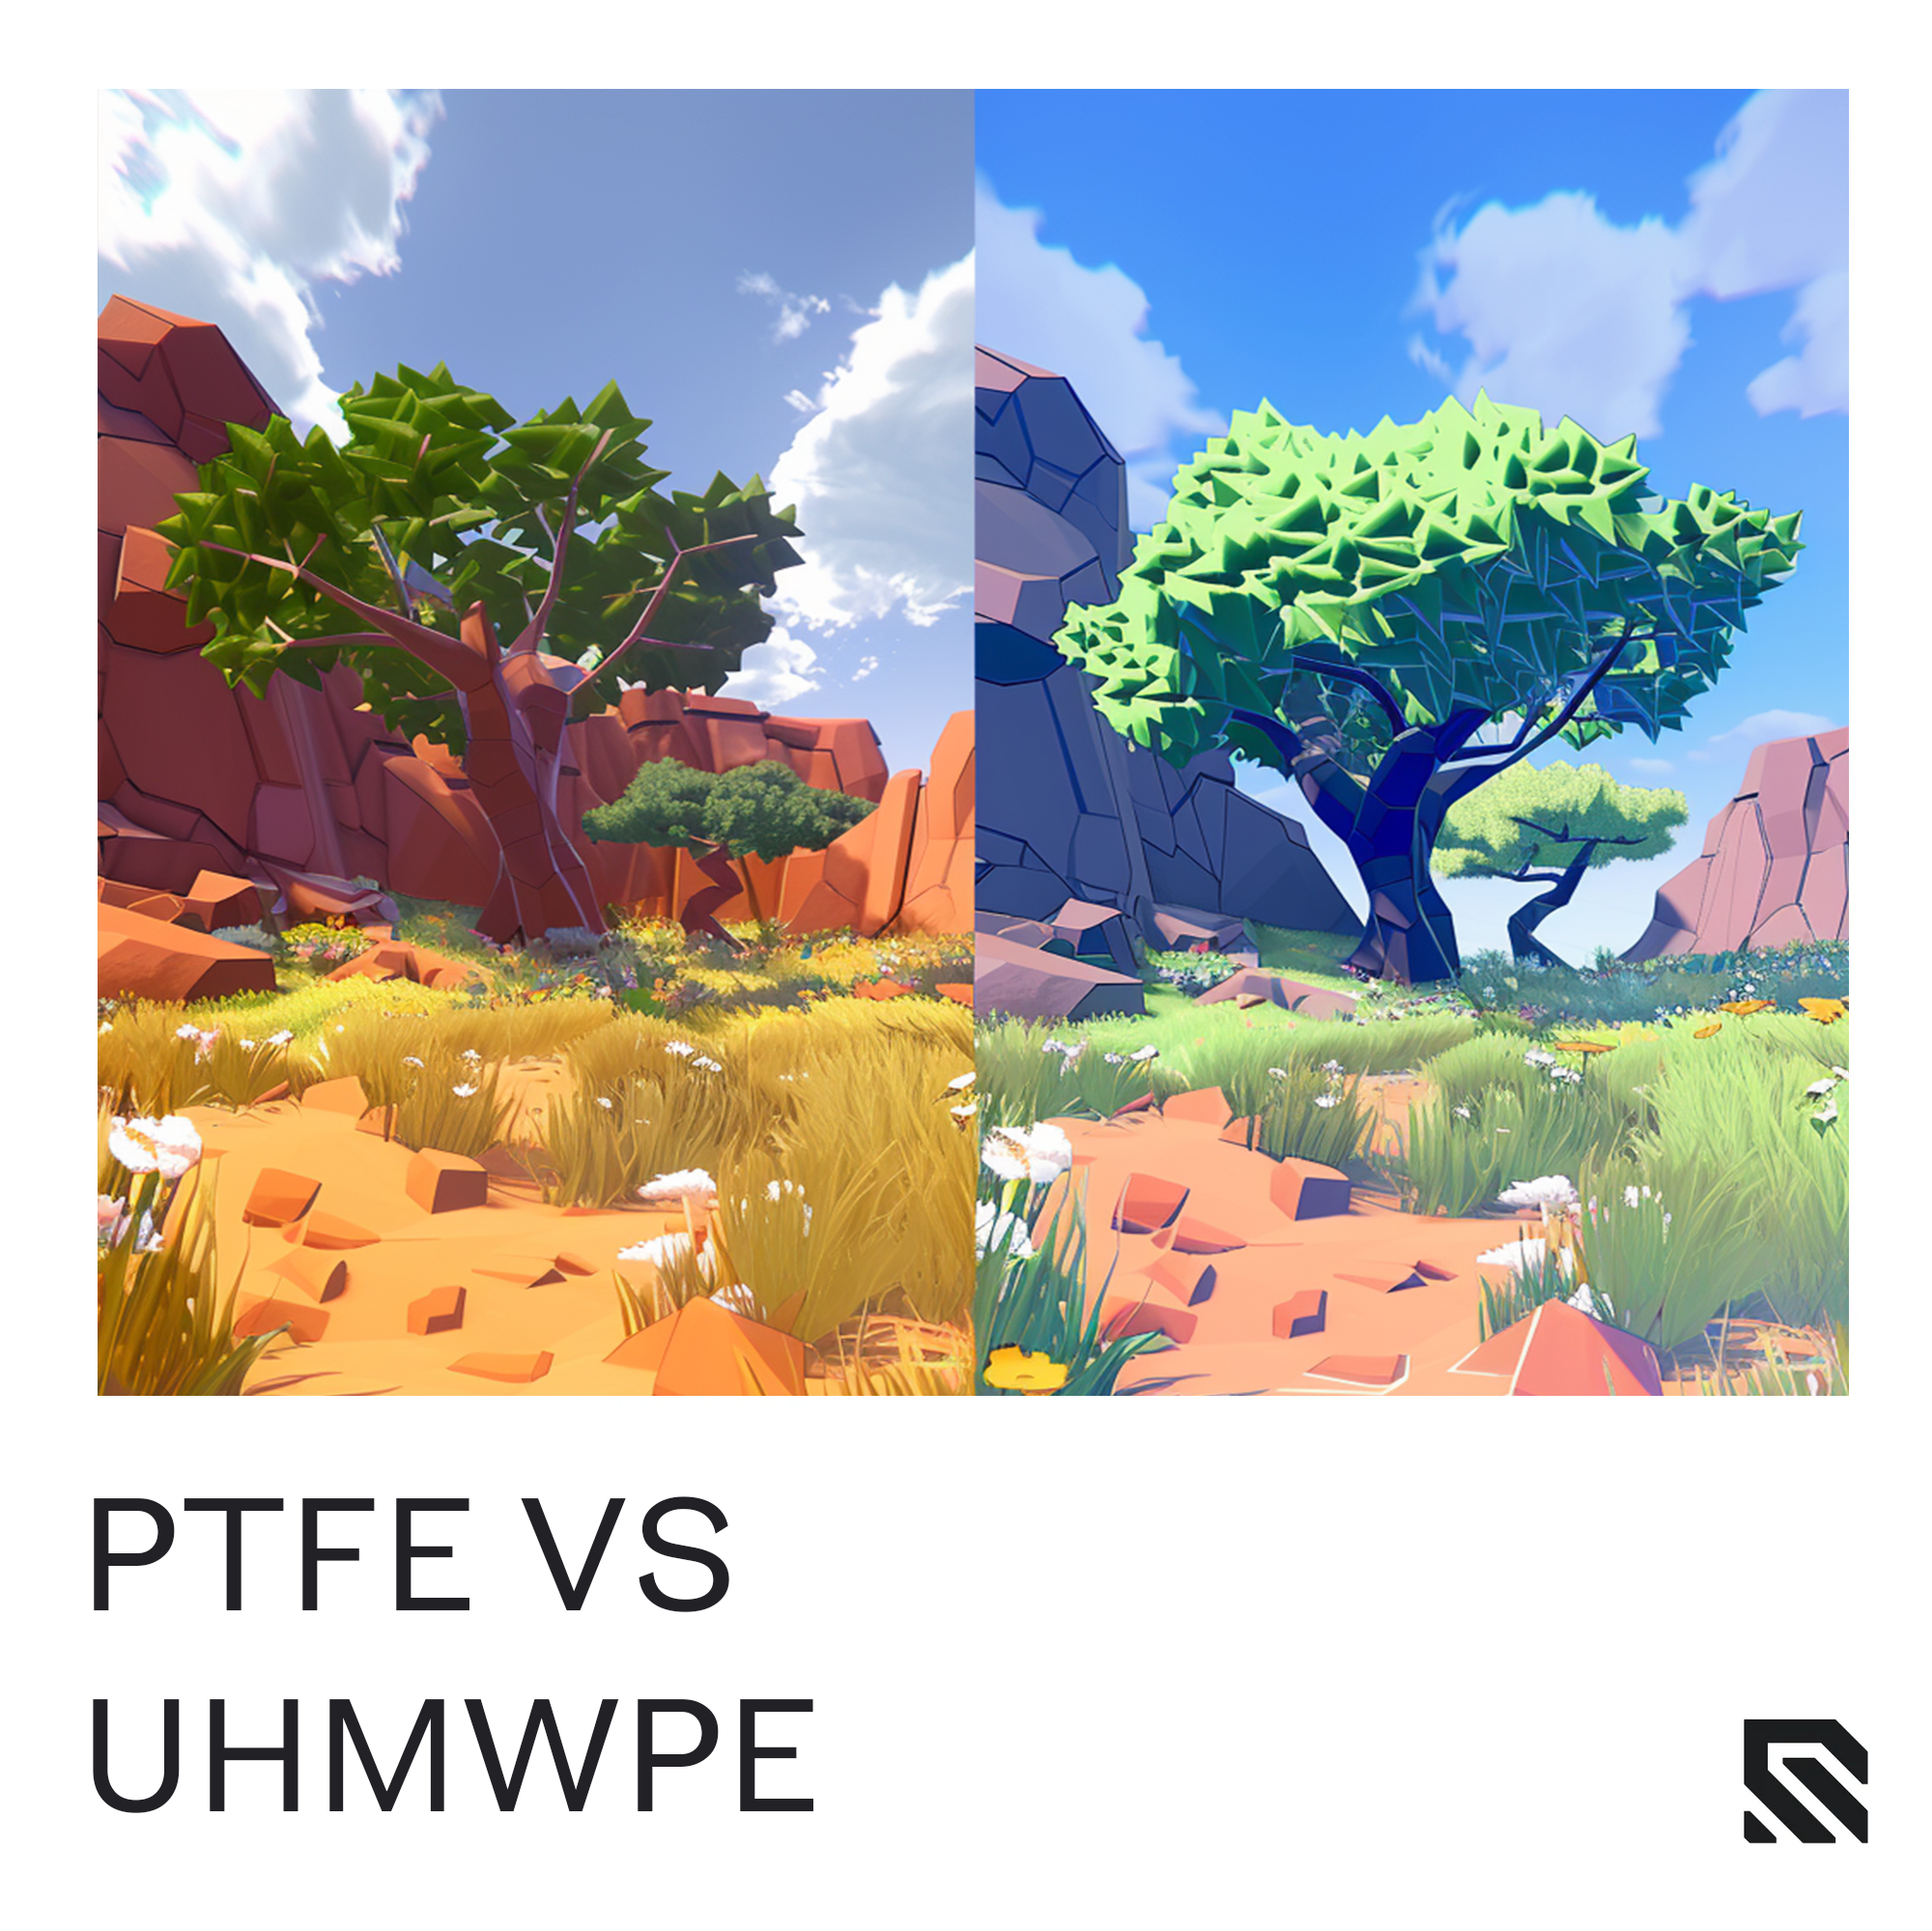 UHMWPE vs PTFE Mouse Skates Wallhack comparison of retro styled game environment